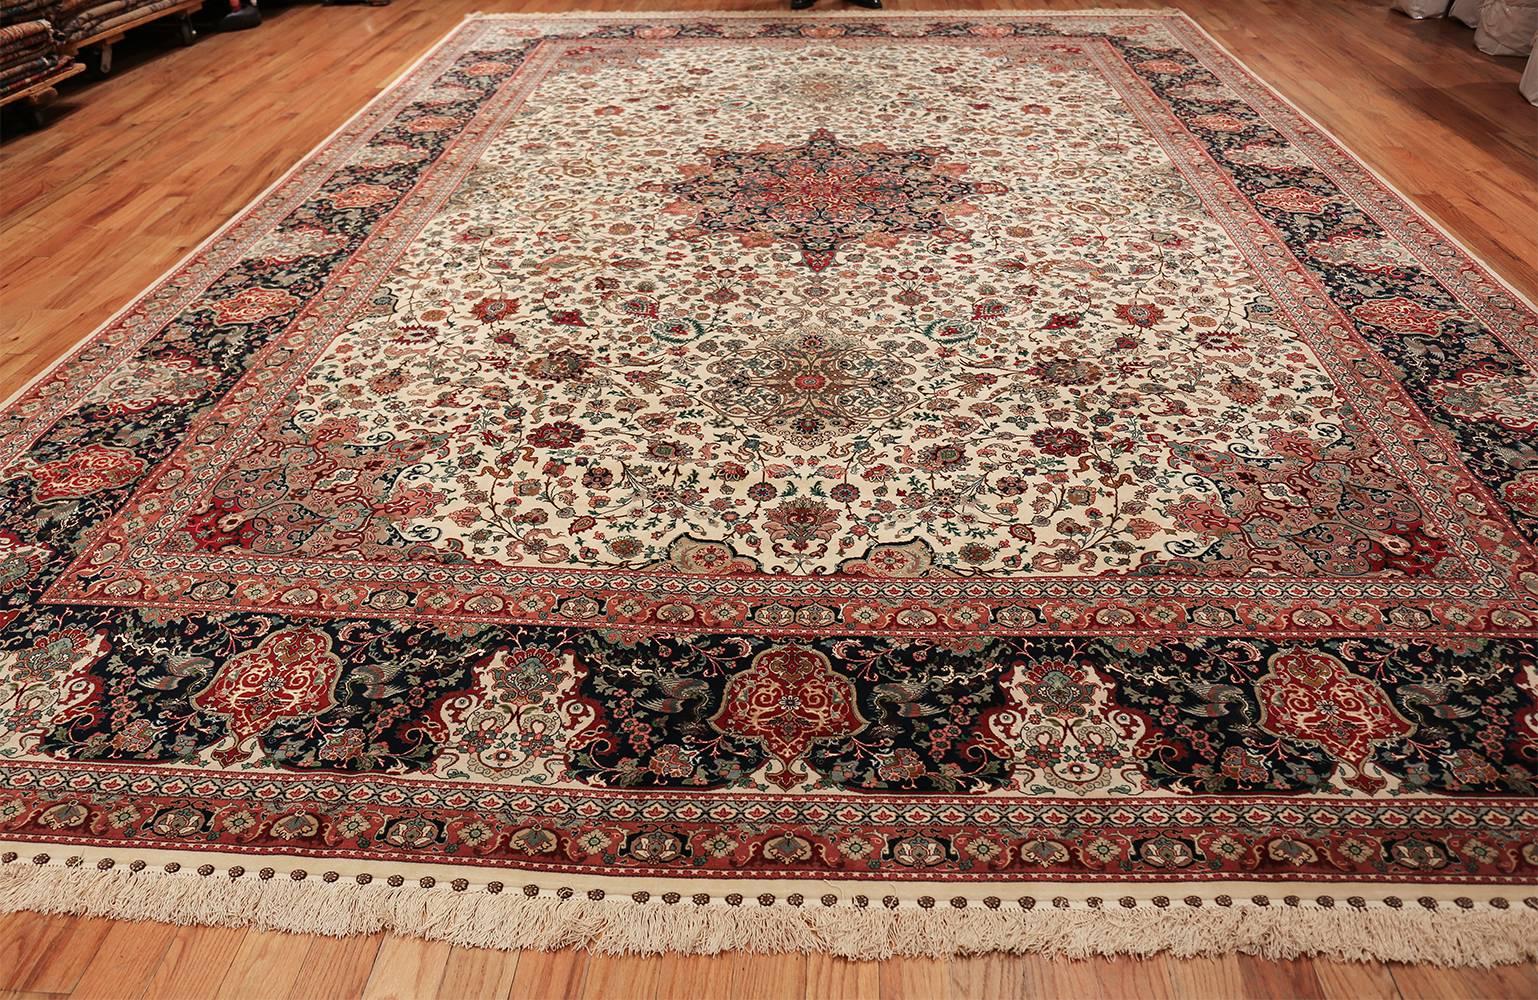 Silk and Wool Large Vintage Tabriz Persian Rug. Size: 11 ft 6 in x 16 ft 6 in 1